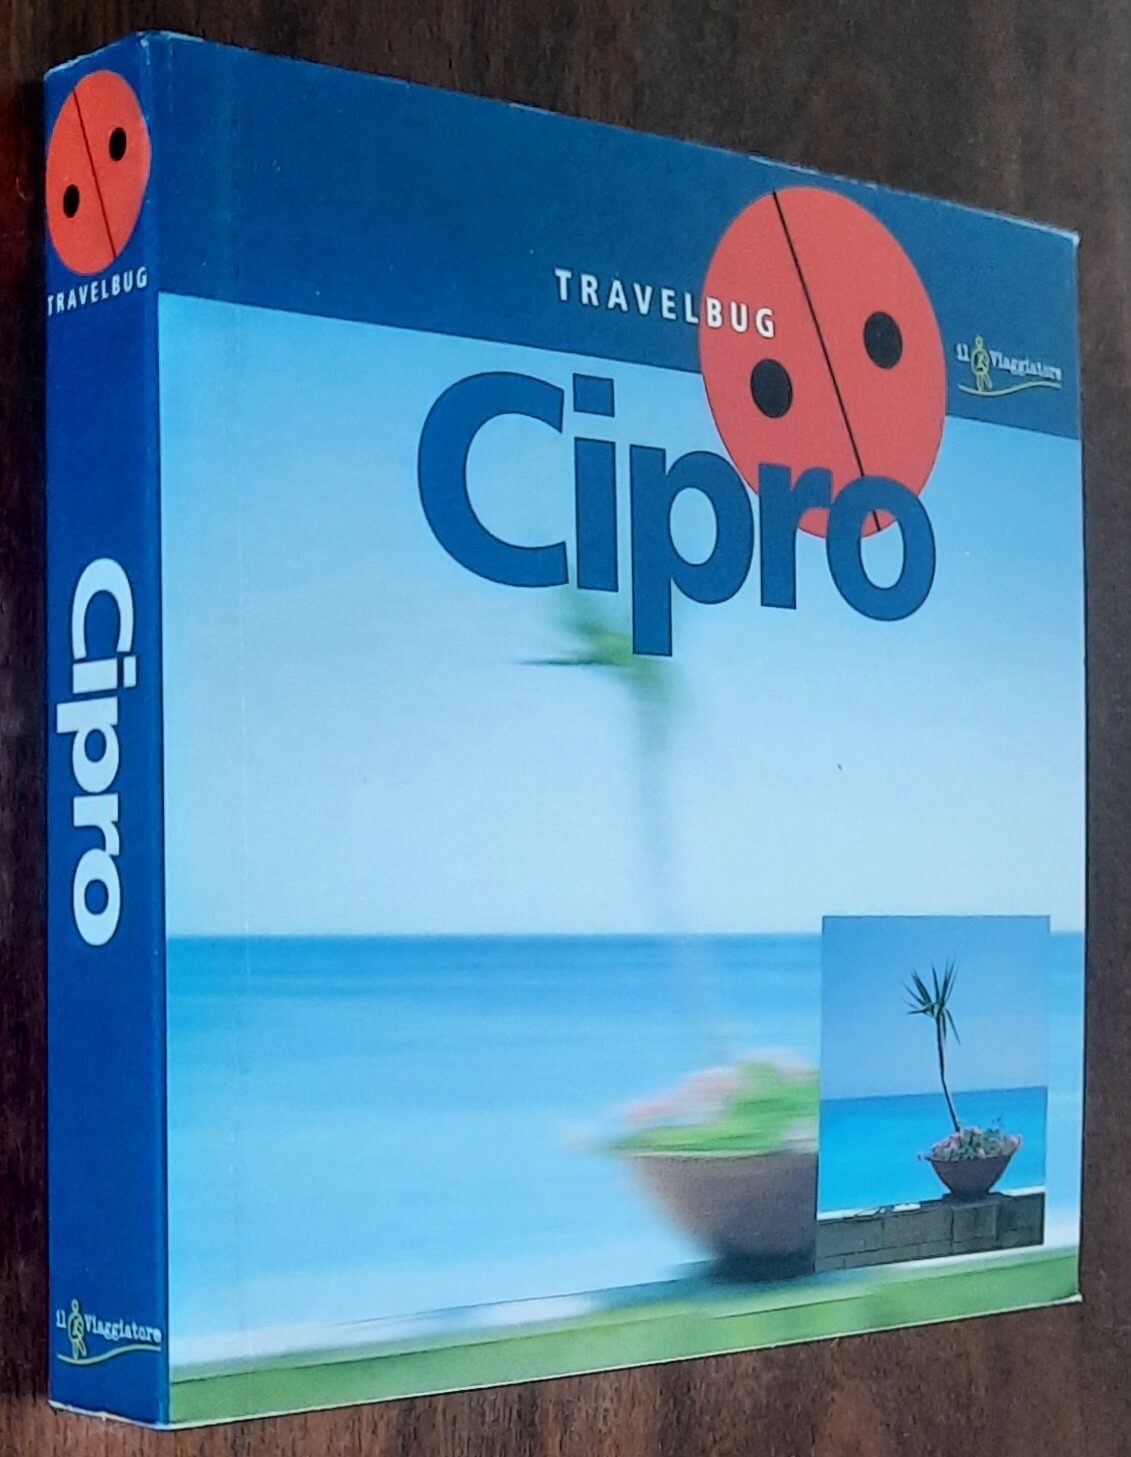 Cipro - Guide Travelbug - Touring Club